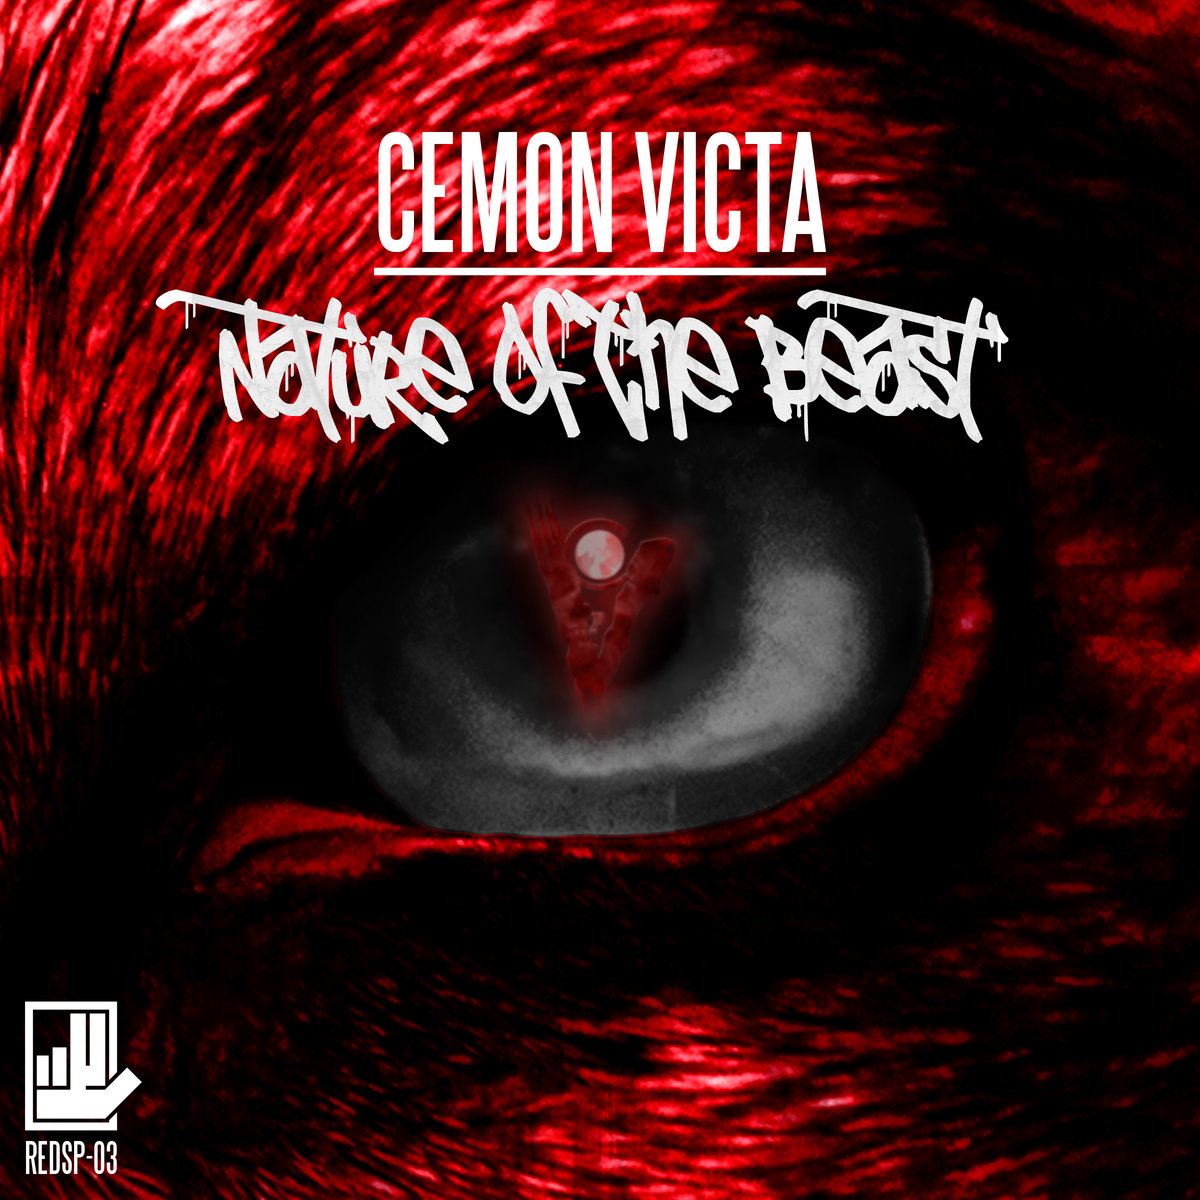 Cemon Victa - League Of Shadows @ 'Nature Of The Beast' album (electronic, cemon victa)